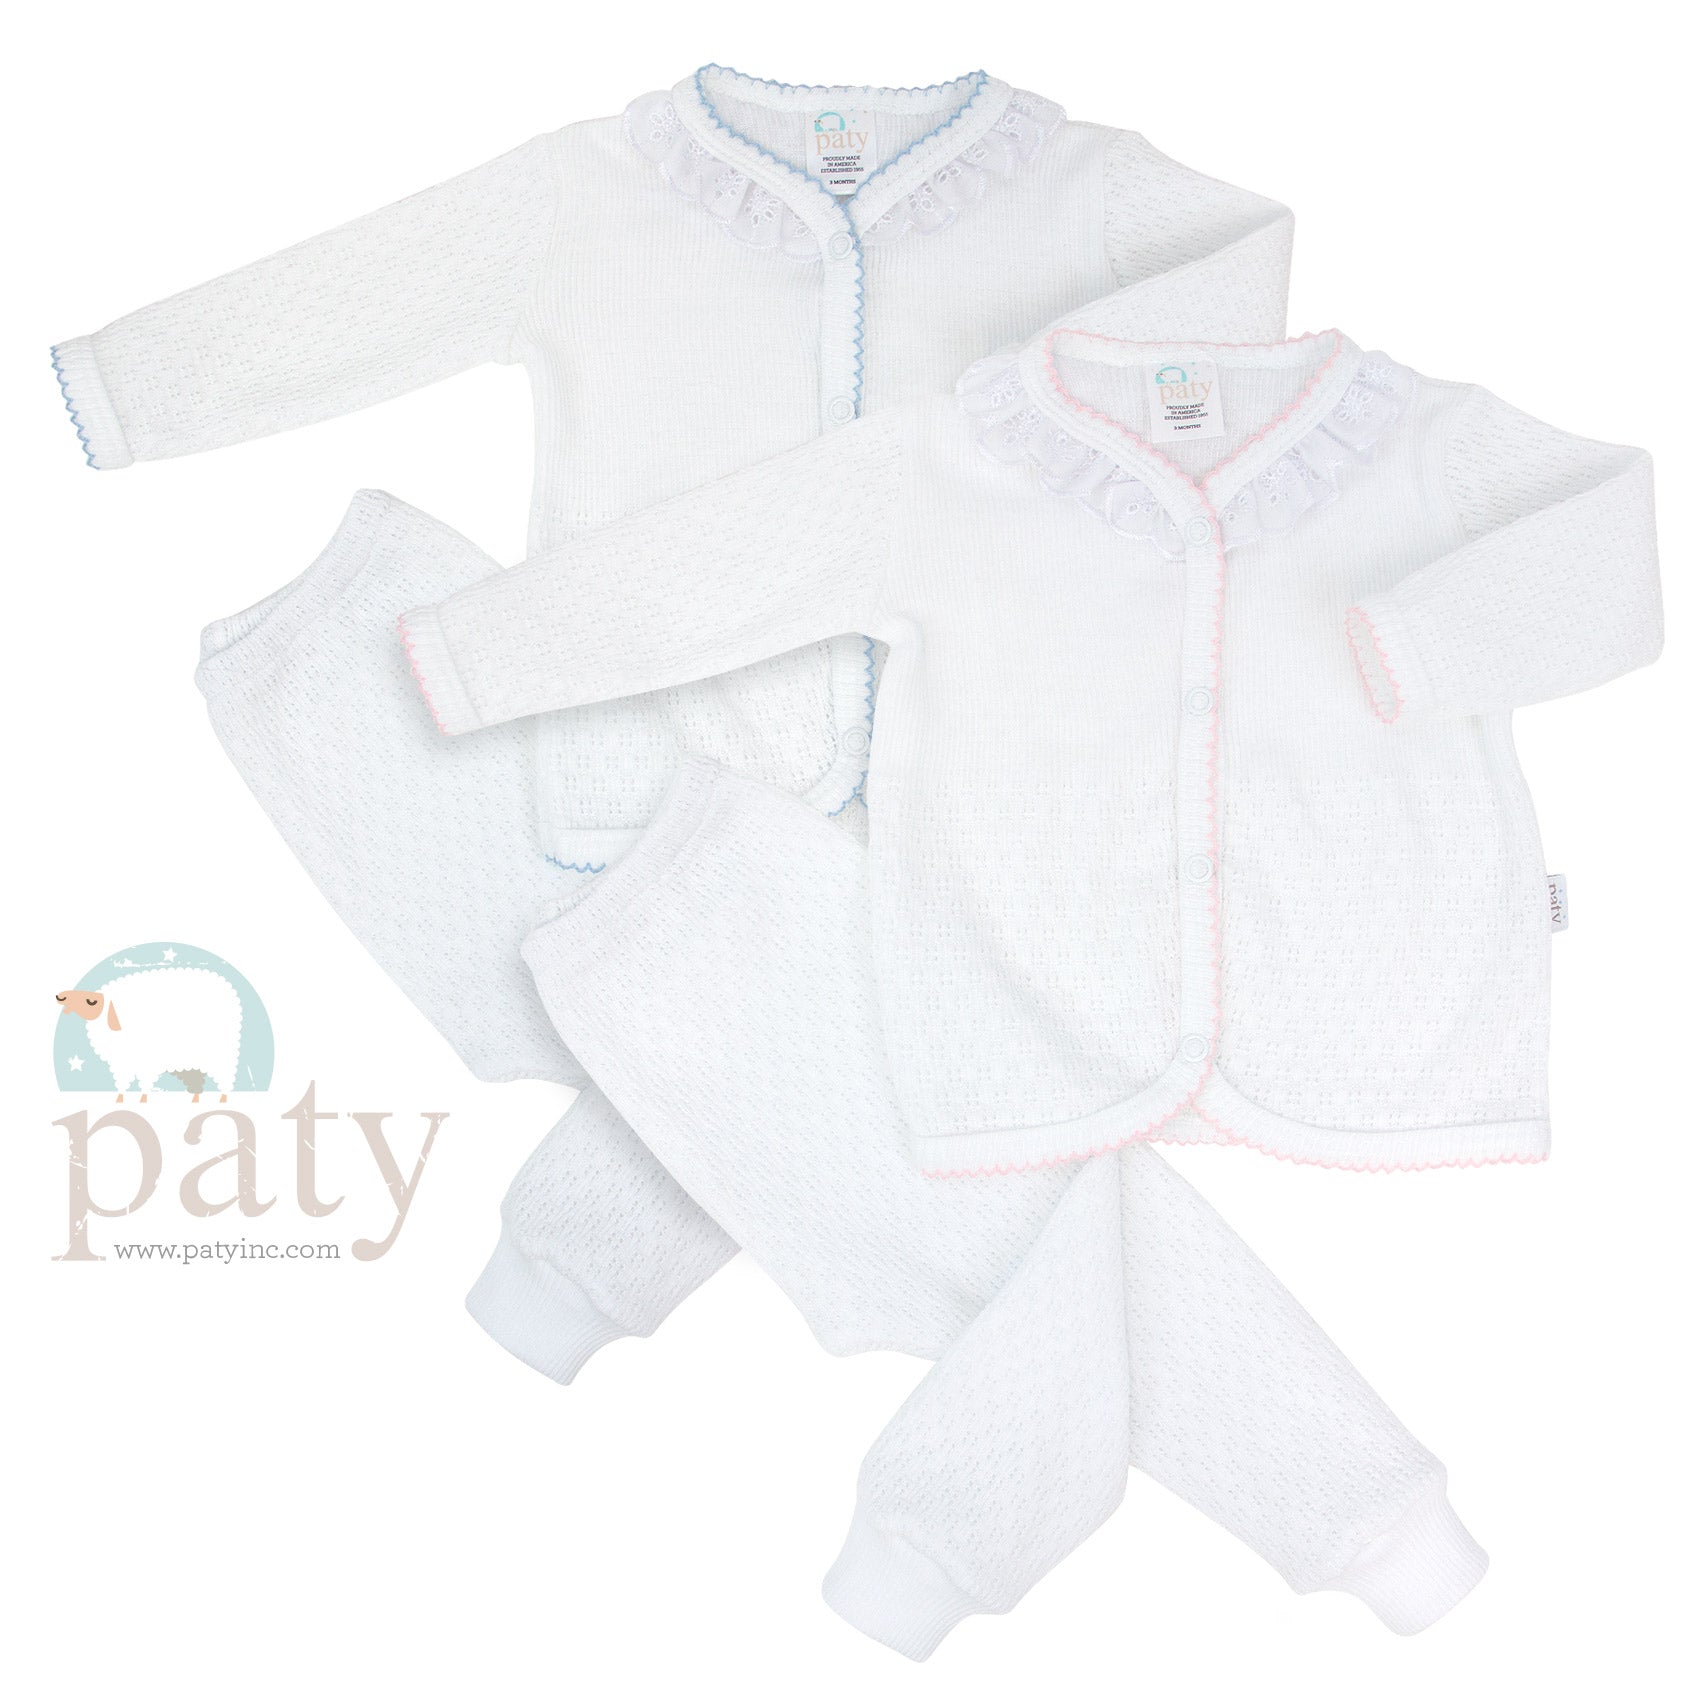 Paty Knit Signature White 2 PC Set with Eyelet Trim and Long Pants